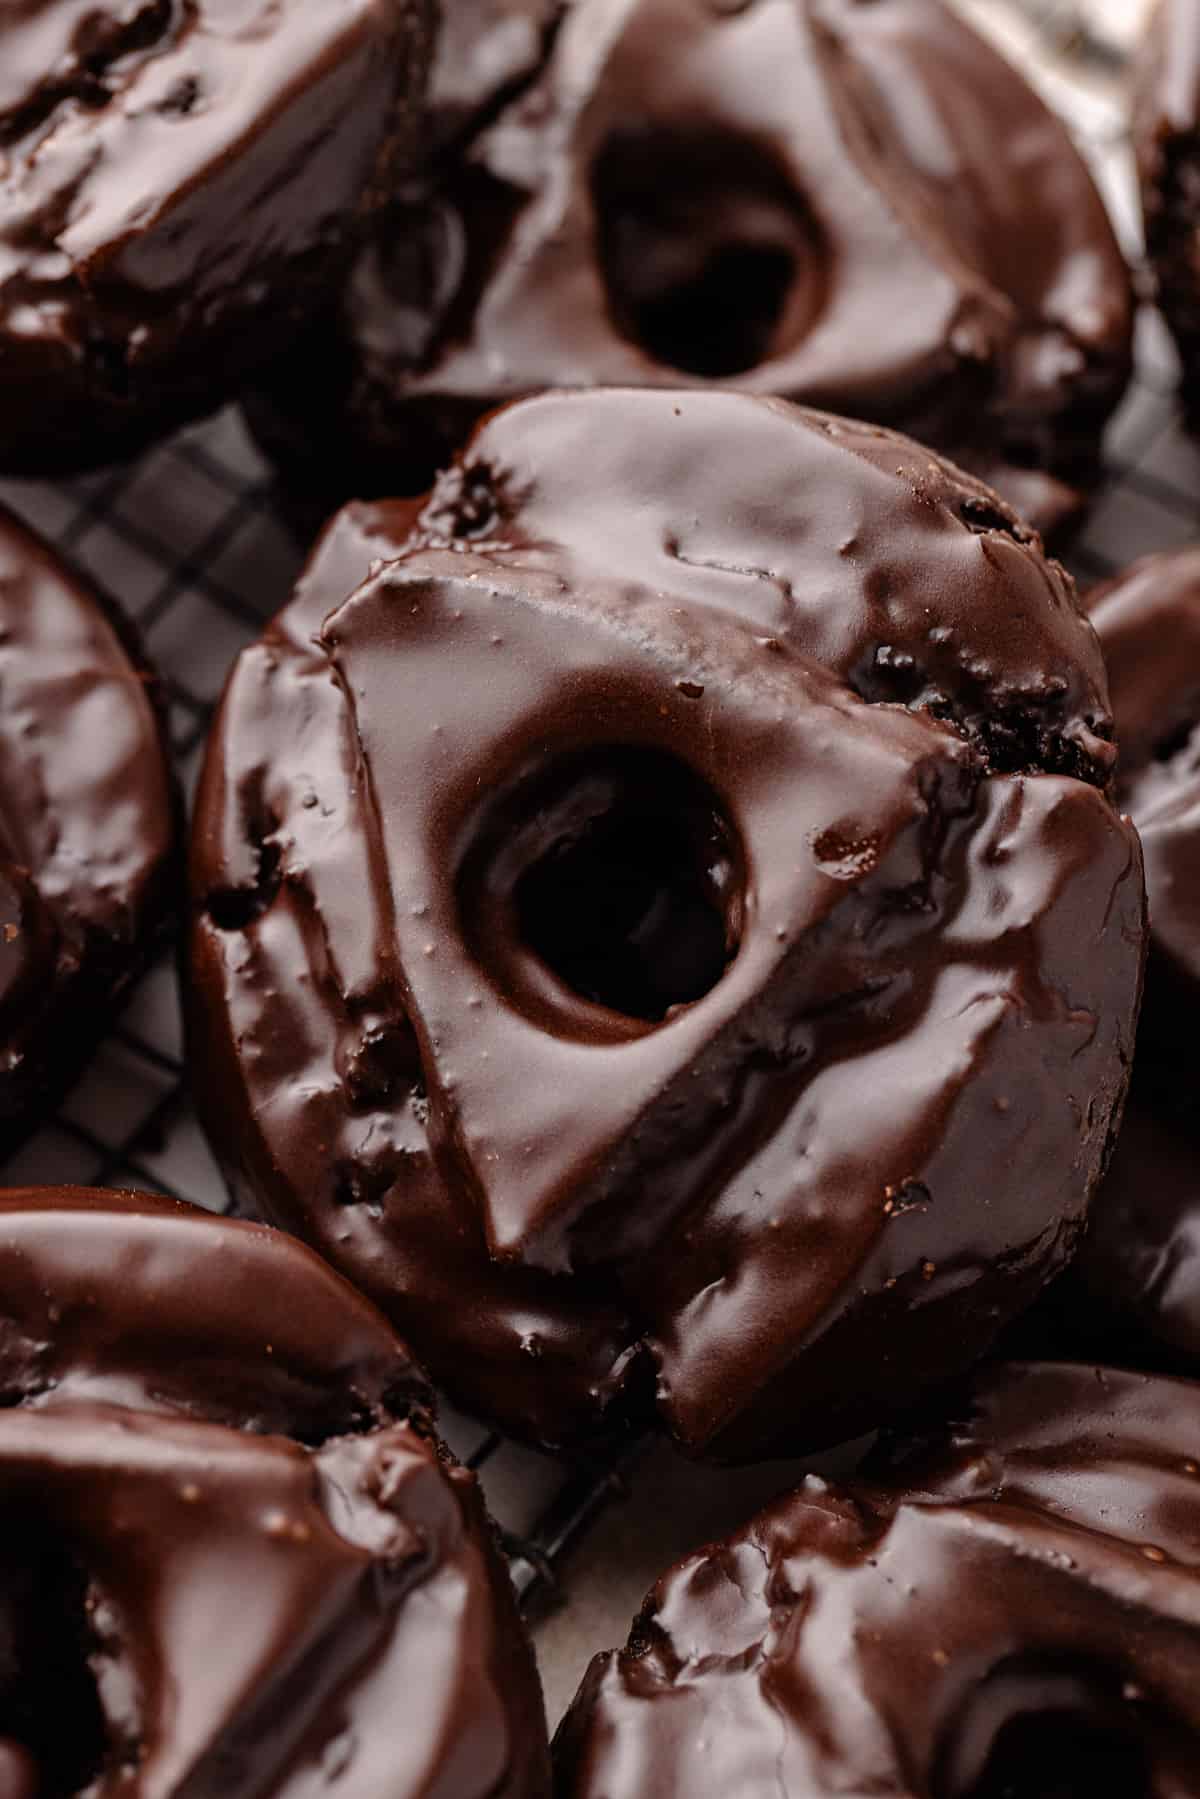 CHOCOLATE OLD FASHIONED DONUTS